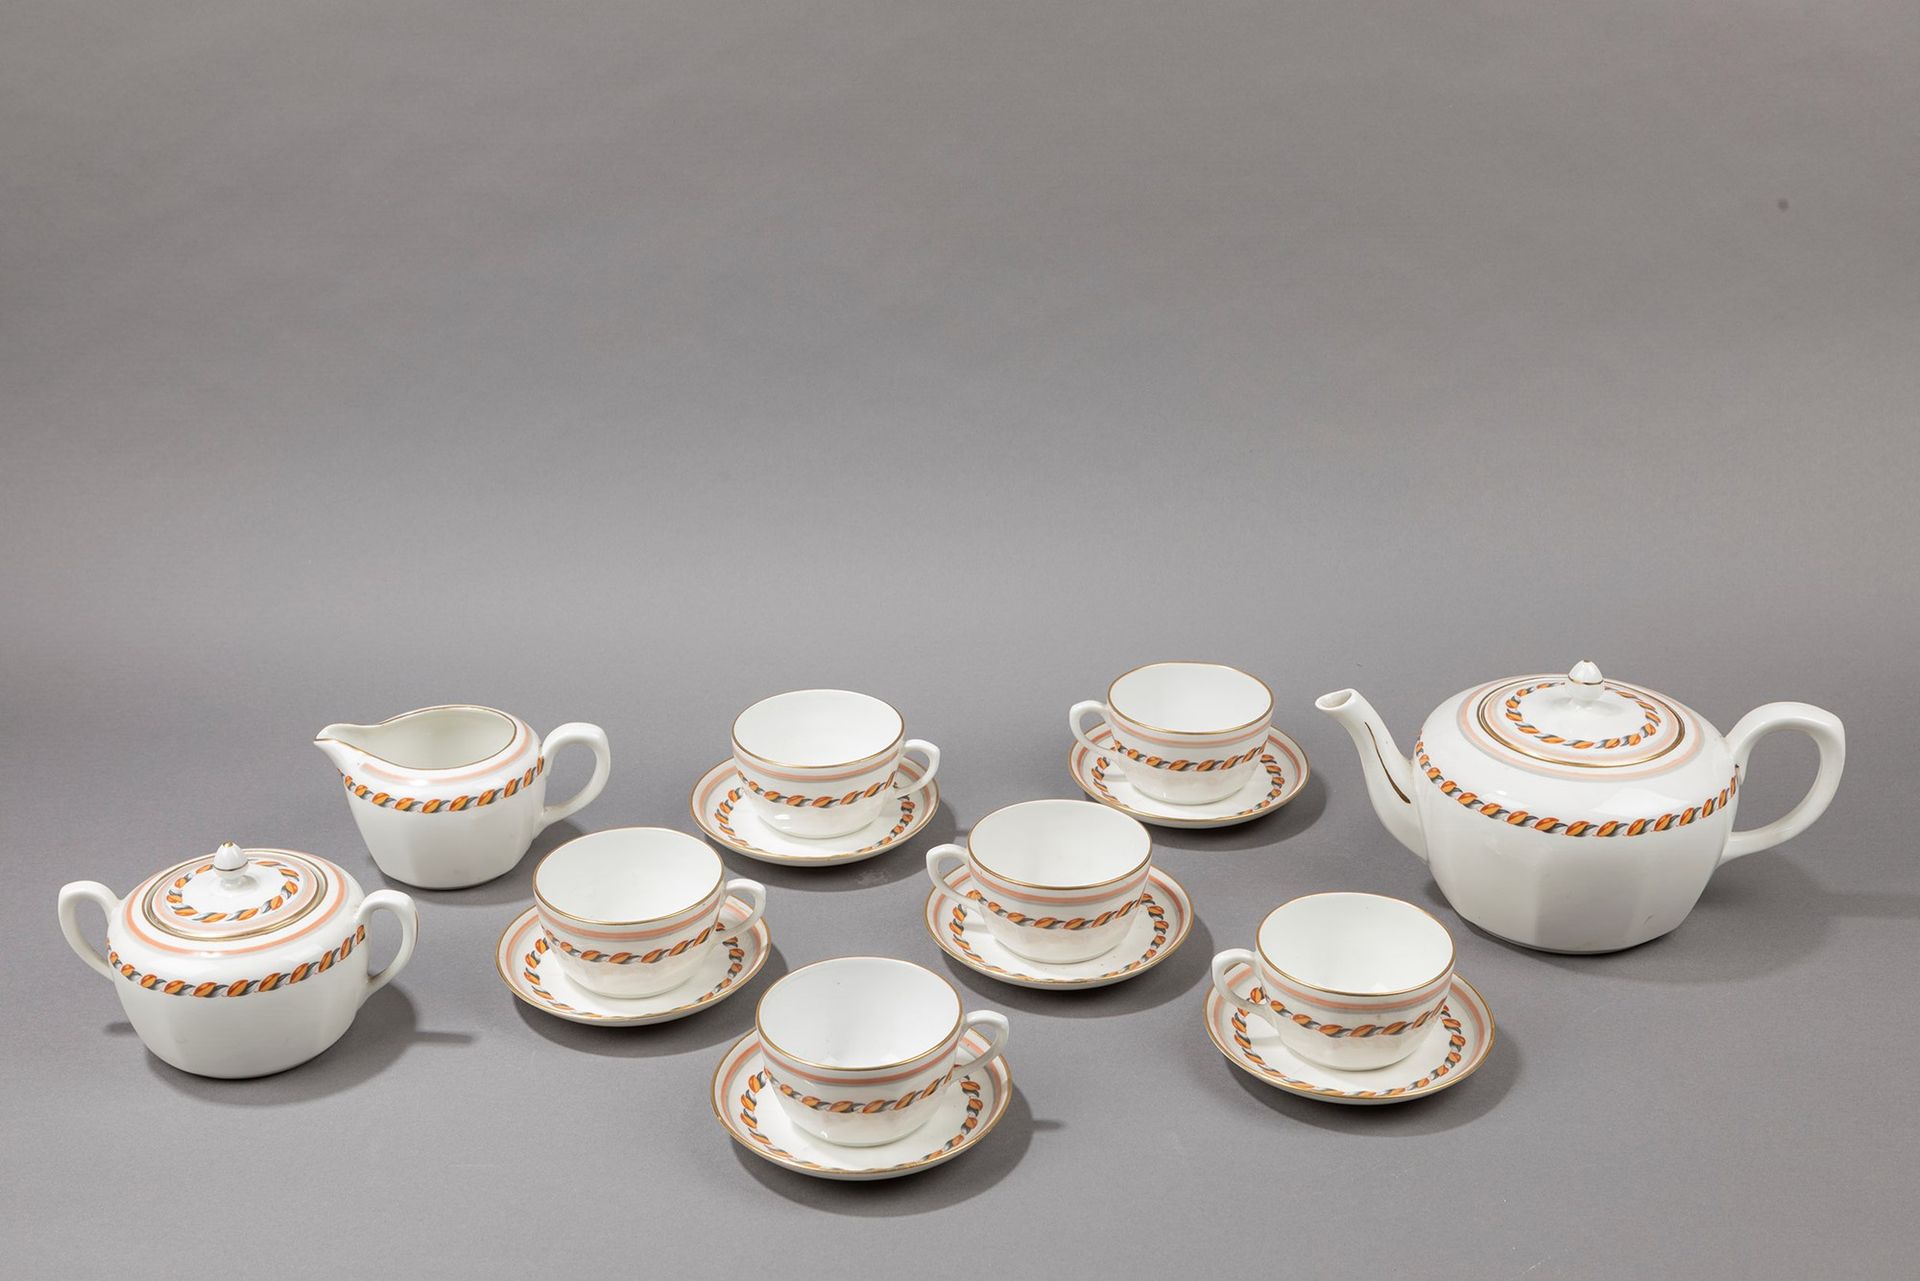 GIO PONTI Tea set, ca. 1925.

Different sizes
composed by six cups, six plates a&hellip;